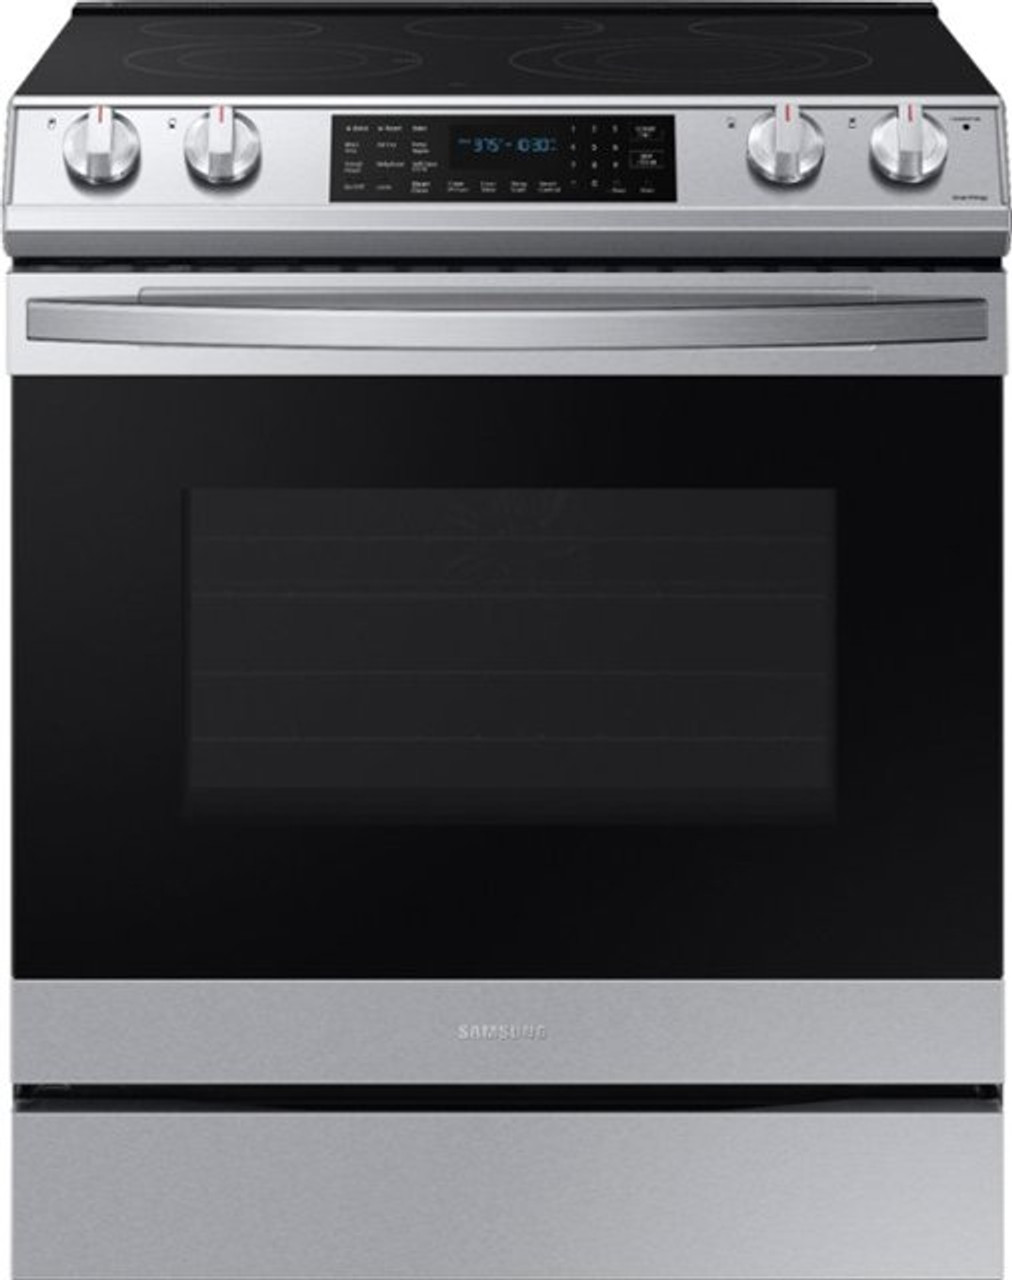 Samsung - 6.3 cu. ft. Front Control Slide-In Electric Convection Range with Air Fry & Wi-Fi, Fingerprint Resistant - Stainless Steel SKU 6412723